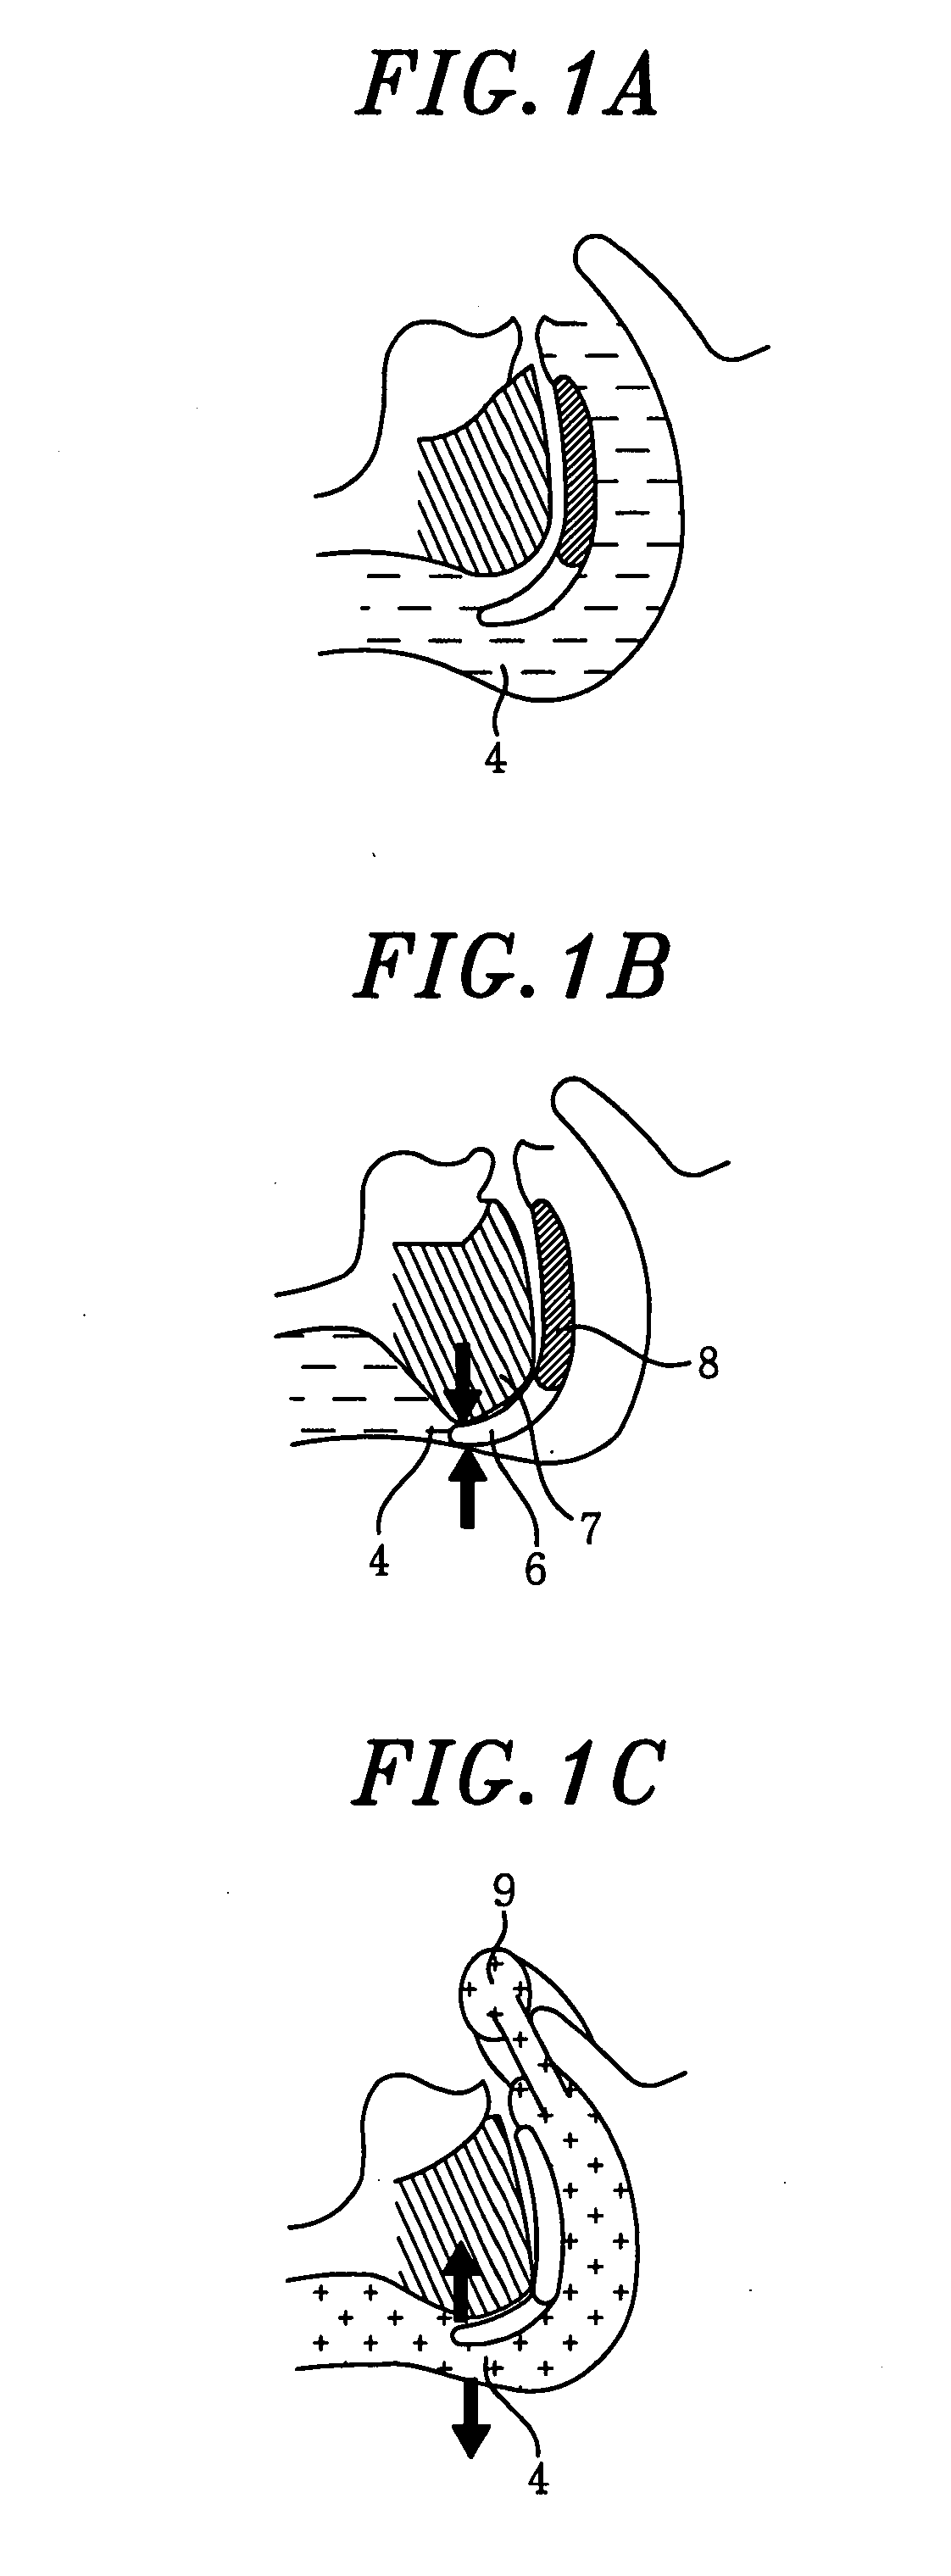 Apparatus for preventing sleeping respiratory obstruction